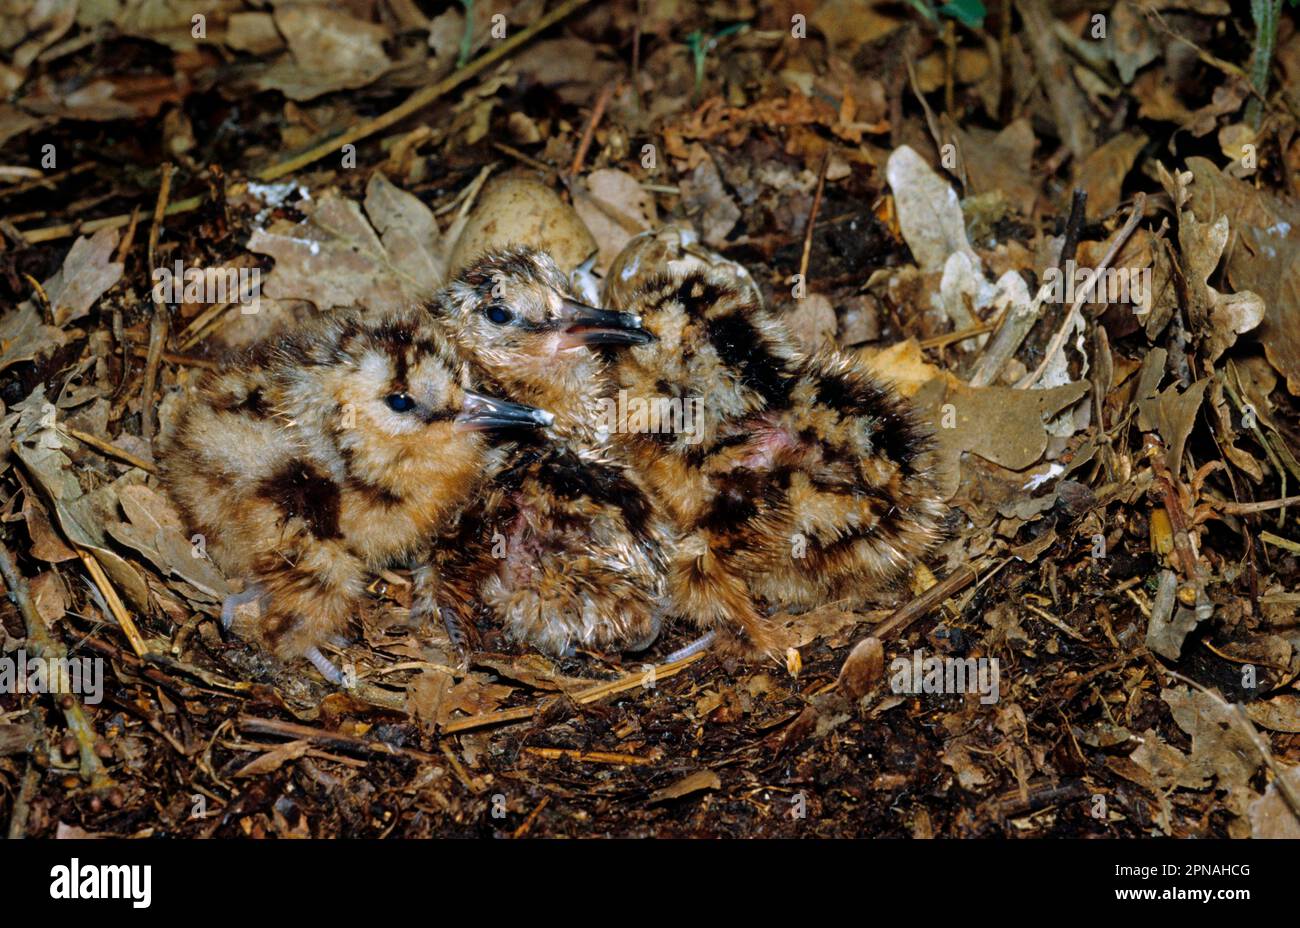 Eurasian woodcock (Scolopax rusticola) freshly hatched chicks in nest, camouflaged on forest floor, Nocton Wood, Lincolnshire, England, Great Britain Stock Photo